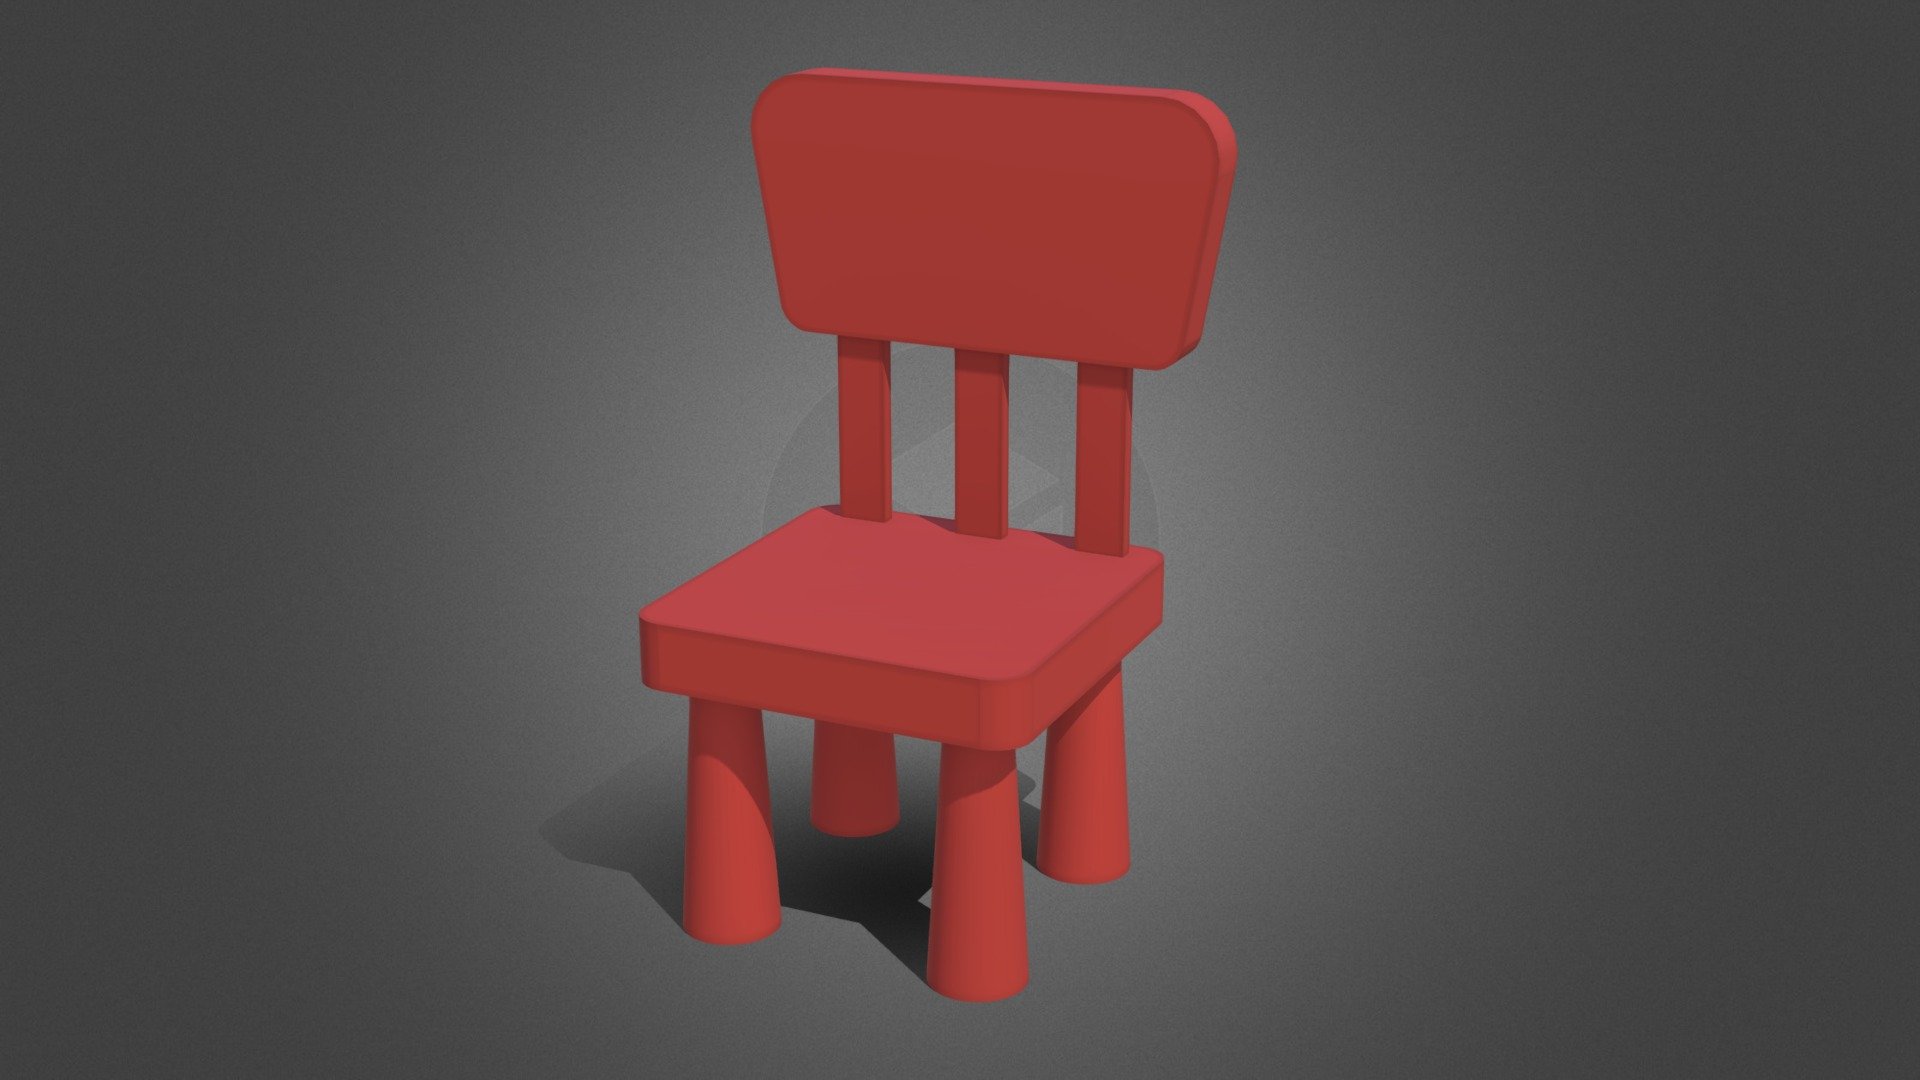 Plastic Children Chair model, modelled and textured in Blender

When using, credit of the author is necessary; a link to your work in the comments is welcome :)

Donate:
DONATE: https://www.buymeacoffee.com/mayre

DONATE: https://www.donationalerts.com/r/junglebird

Mammut - Children Chair - Download Free 3D model by JungleBird 3d model